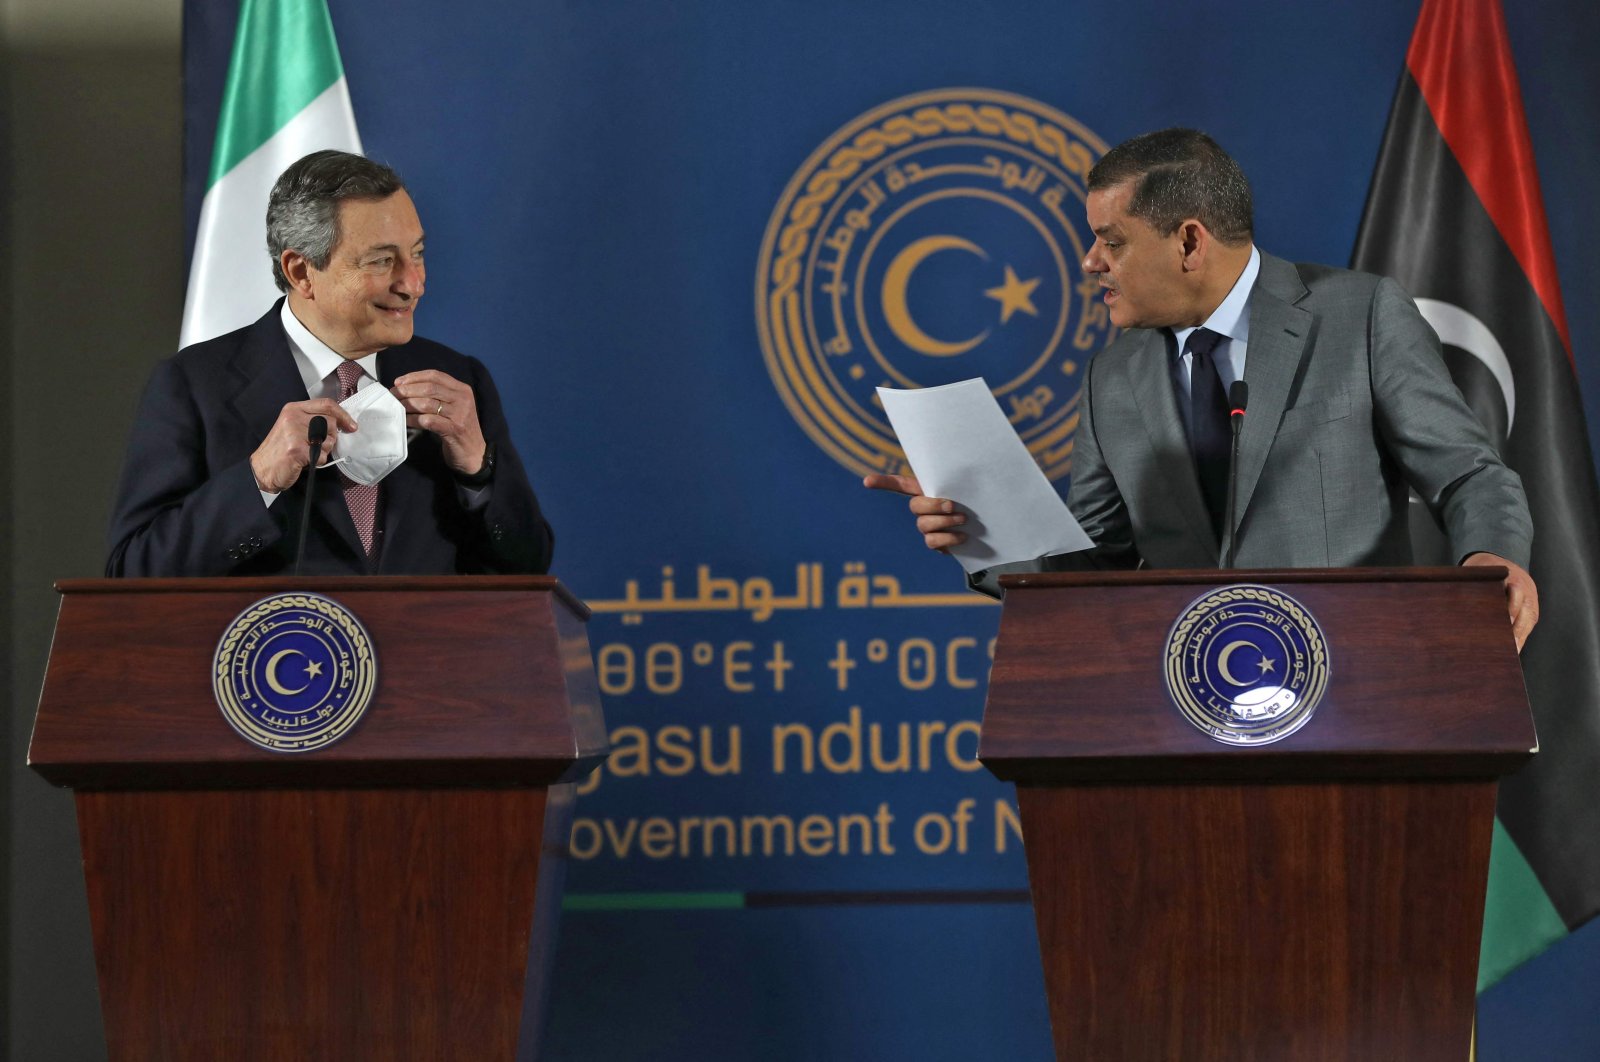 Italian Prime Minister Mario Draghi (L) and Libya's interim Prime Minister Abdul Hamid Dbeibah give a joint press conference at the prime minister's office in the capital Tripoli, Libya, April 6, 2021. (AFP Photo)